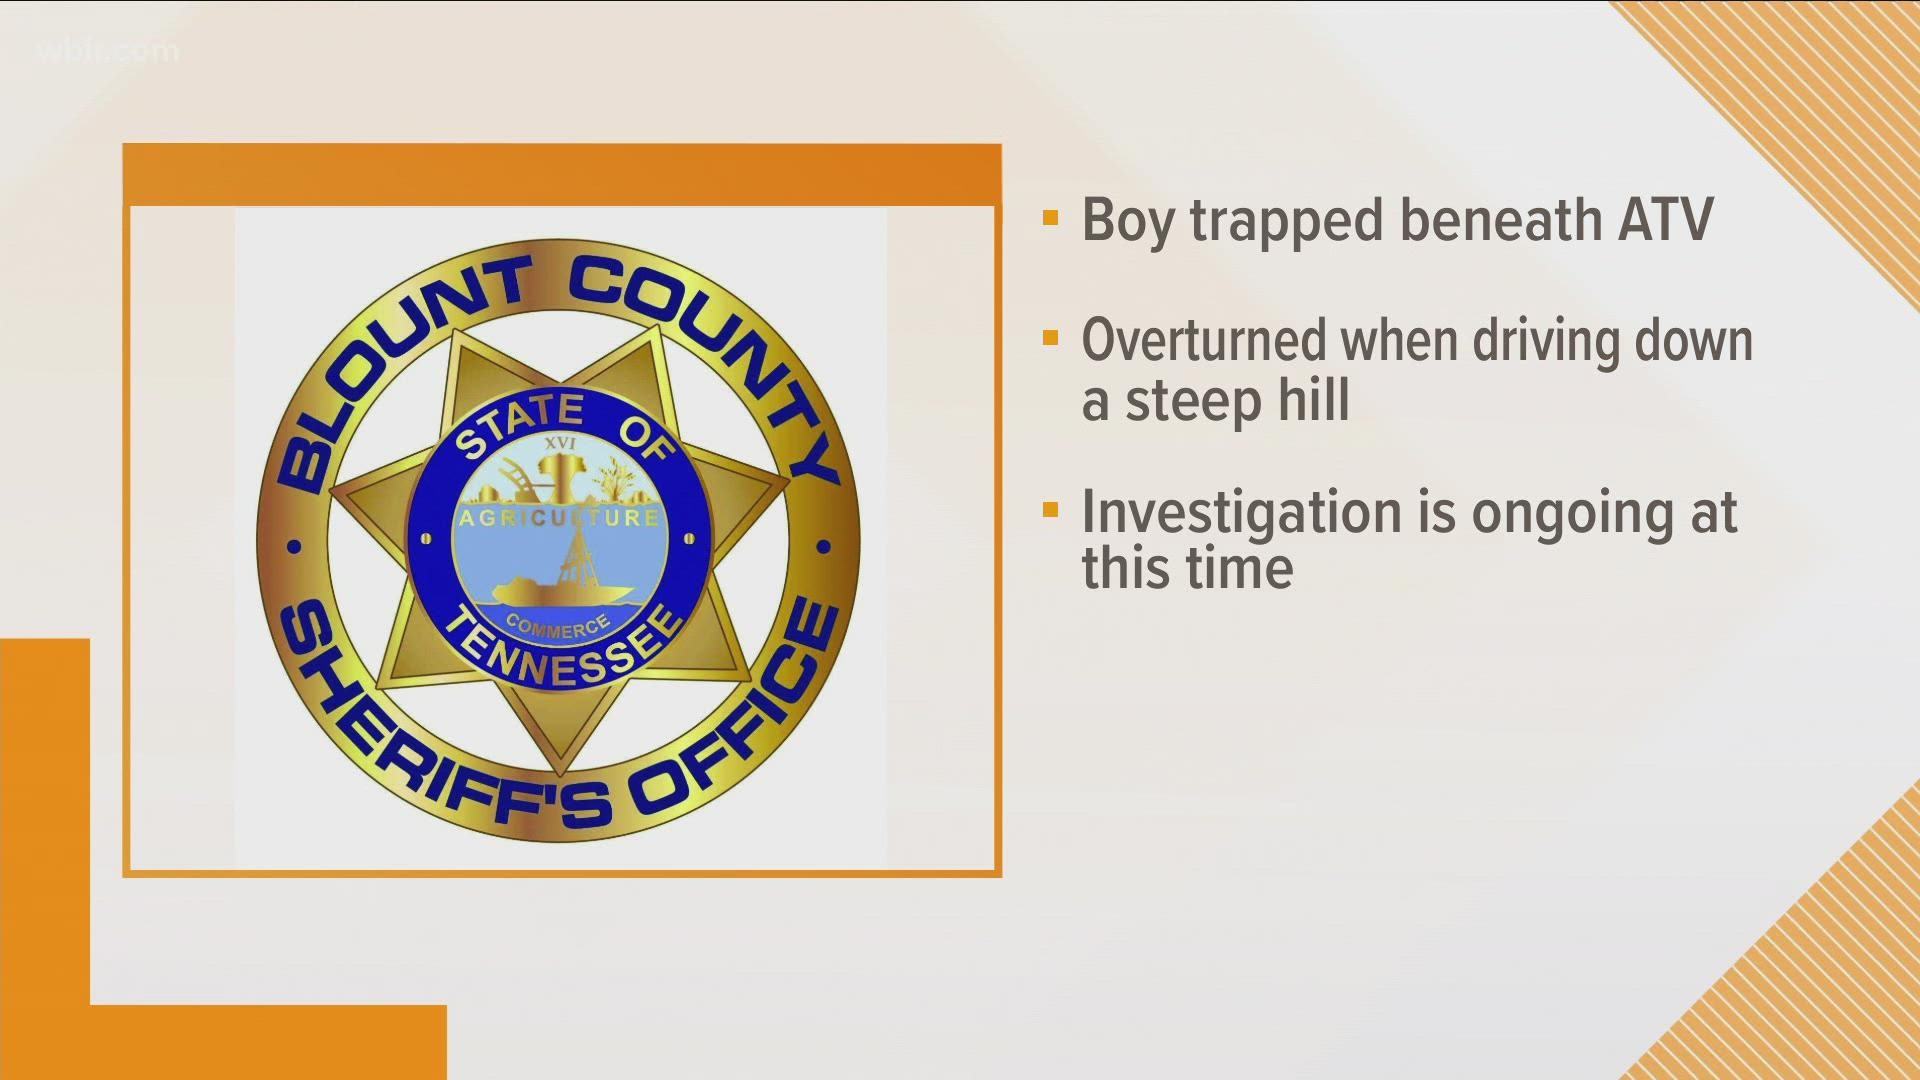 BCSO said the 11-year-old boy was driving the ATV  down a hill on private property when it overturned, pinning him beneath it.